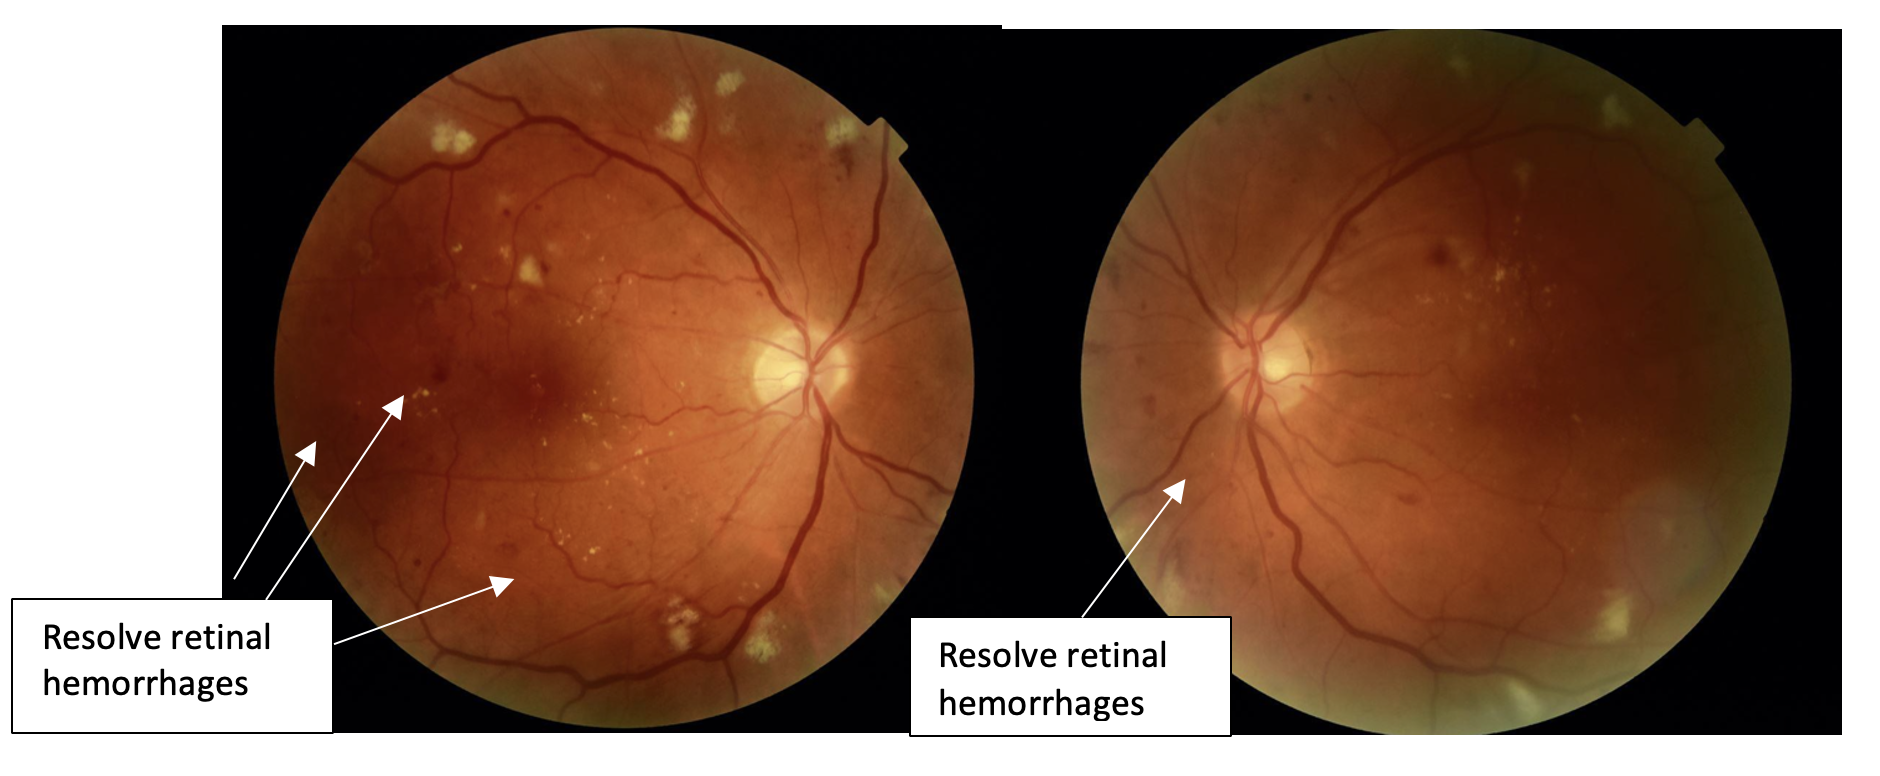 After diabetic retinopathy